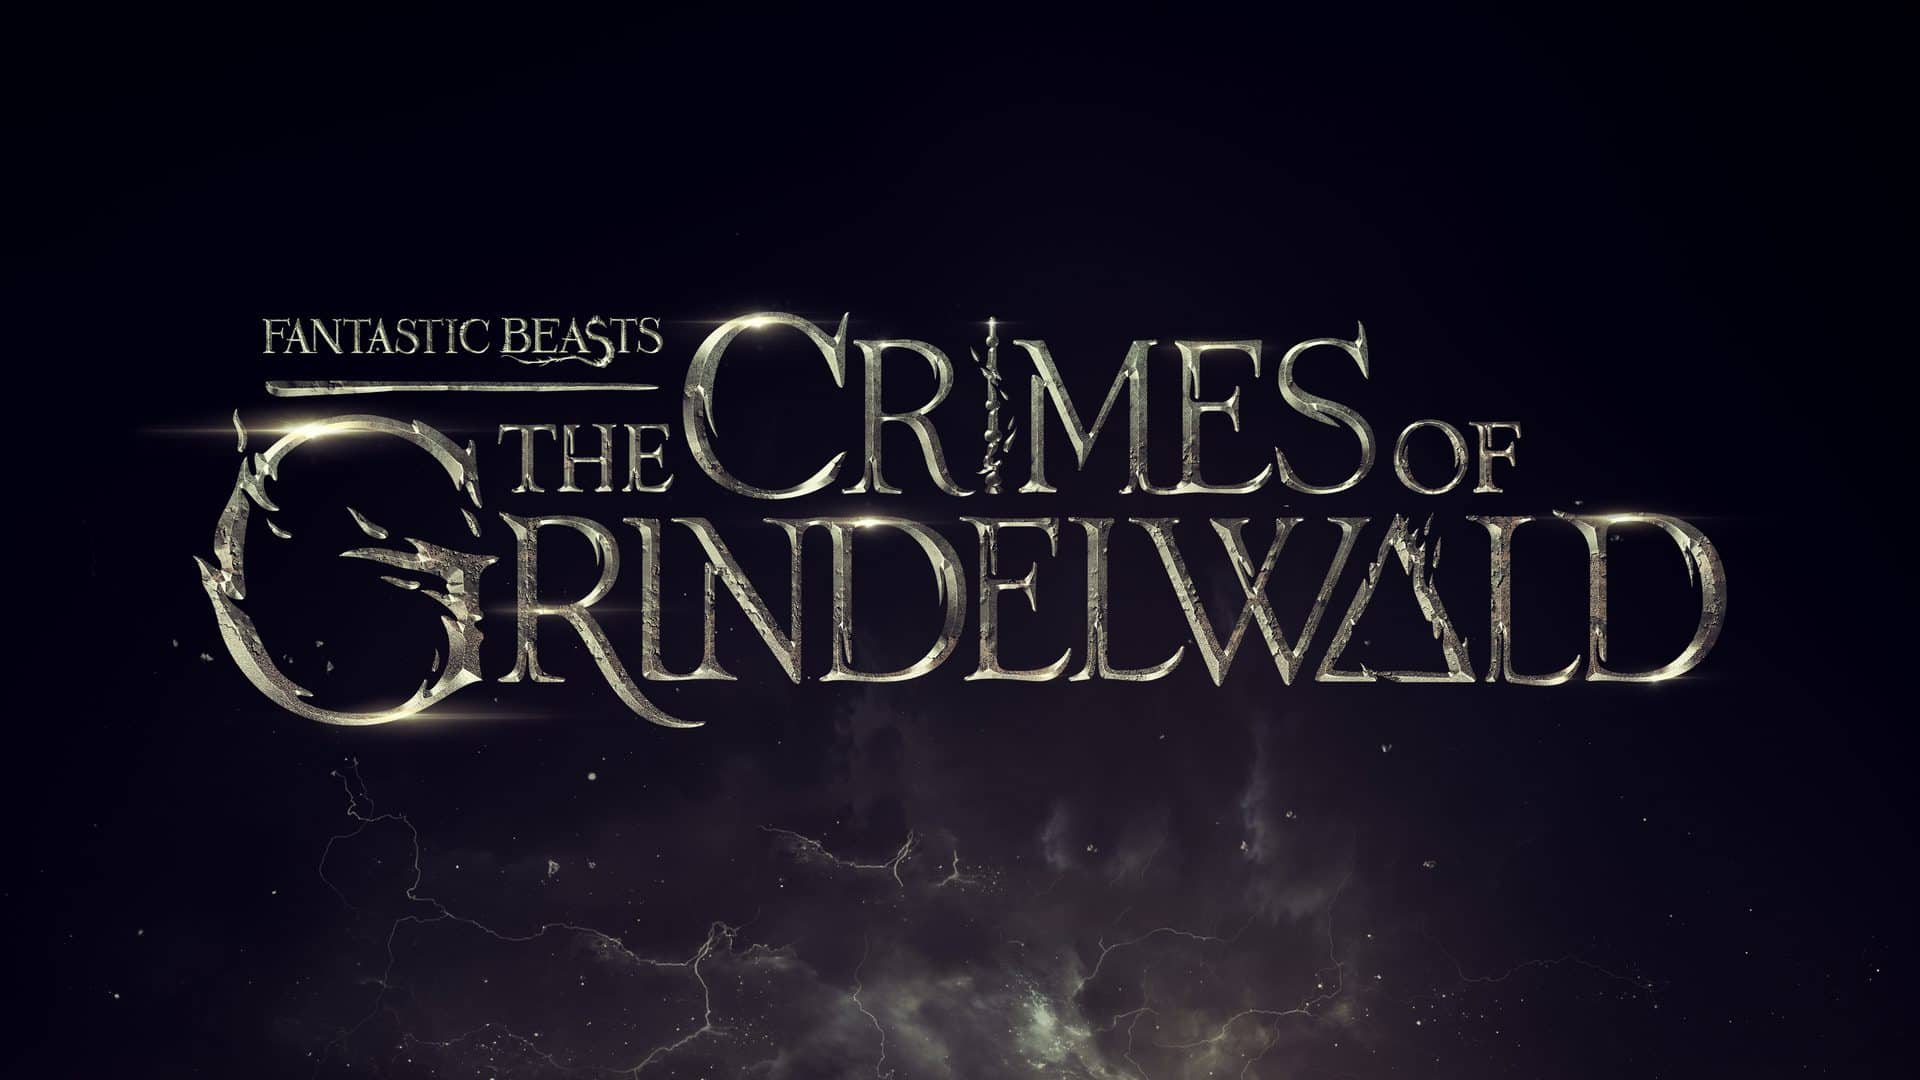 Fantastic Beasts The Crimes of Grindelwald Poster HD